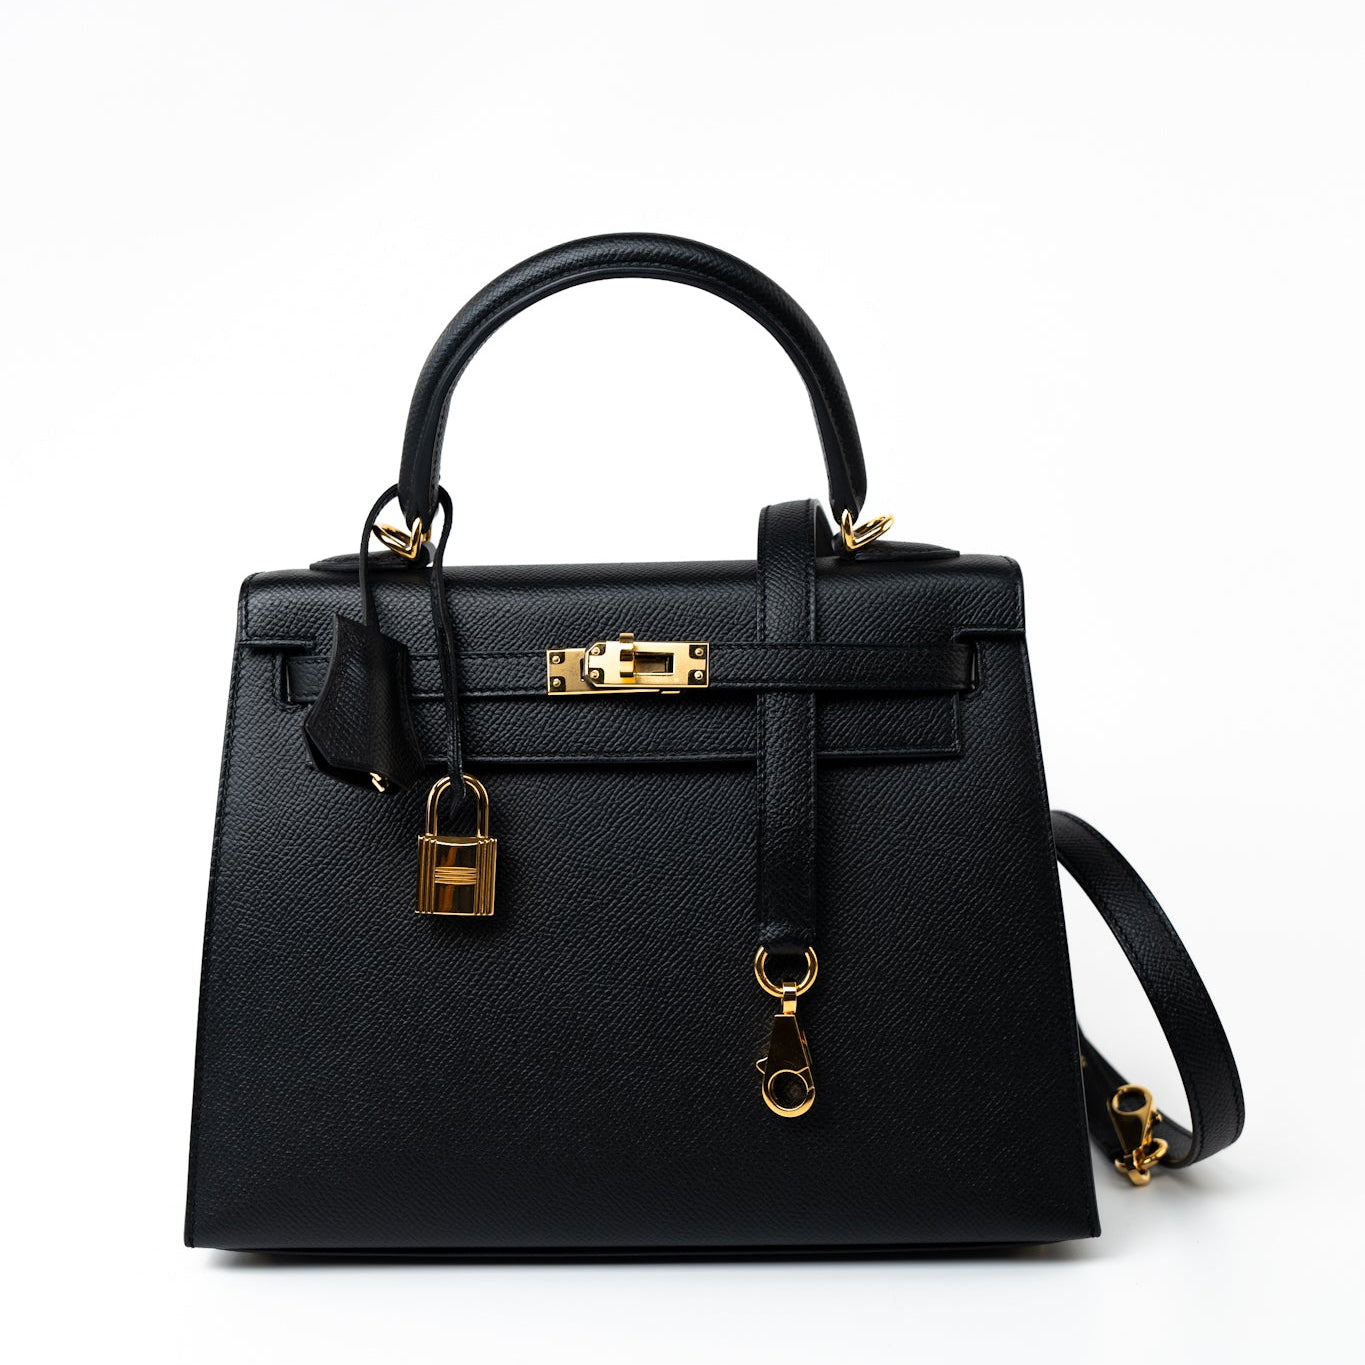 Introducing the Hermes Kelly 25 Veau Epsom Leather